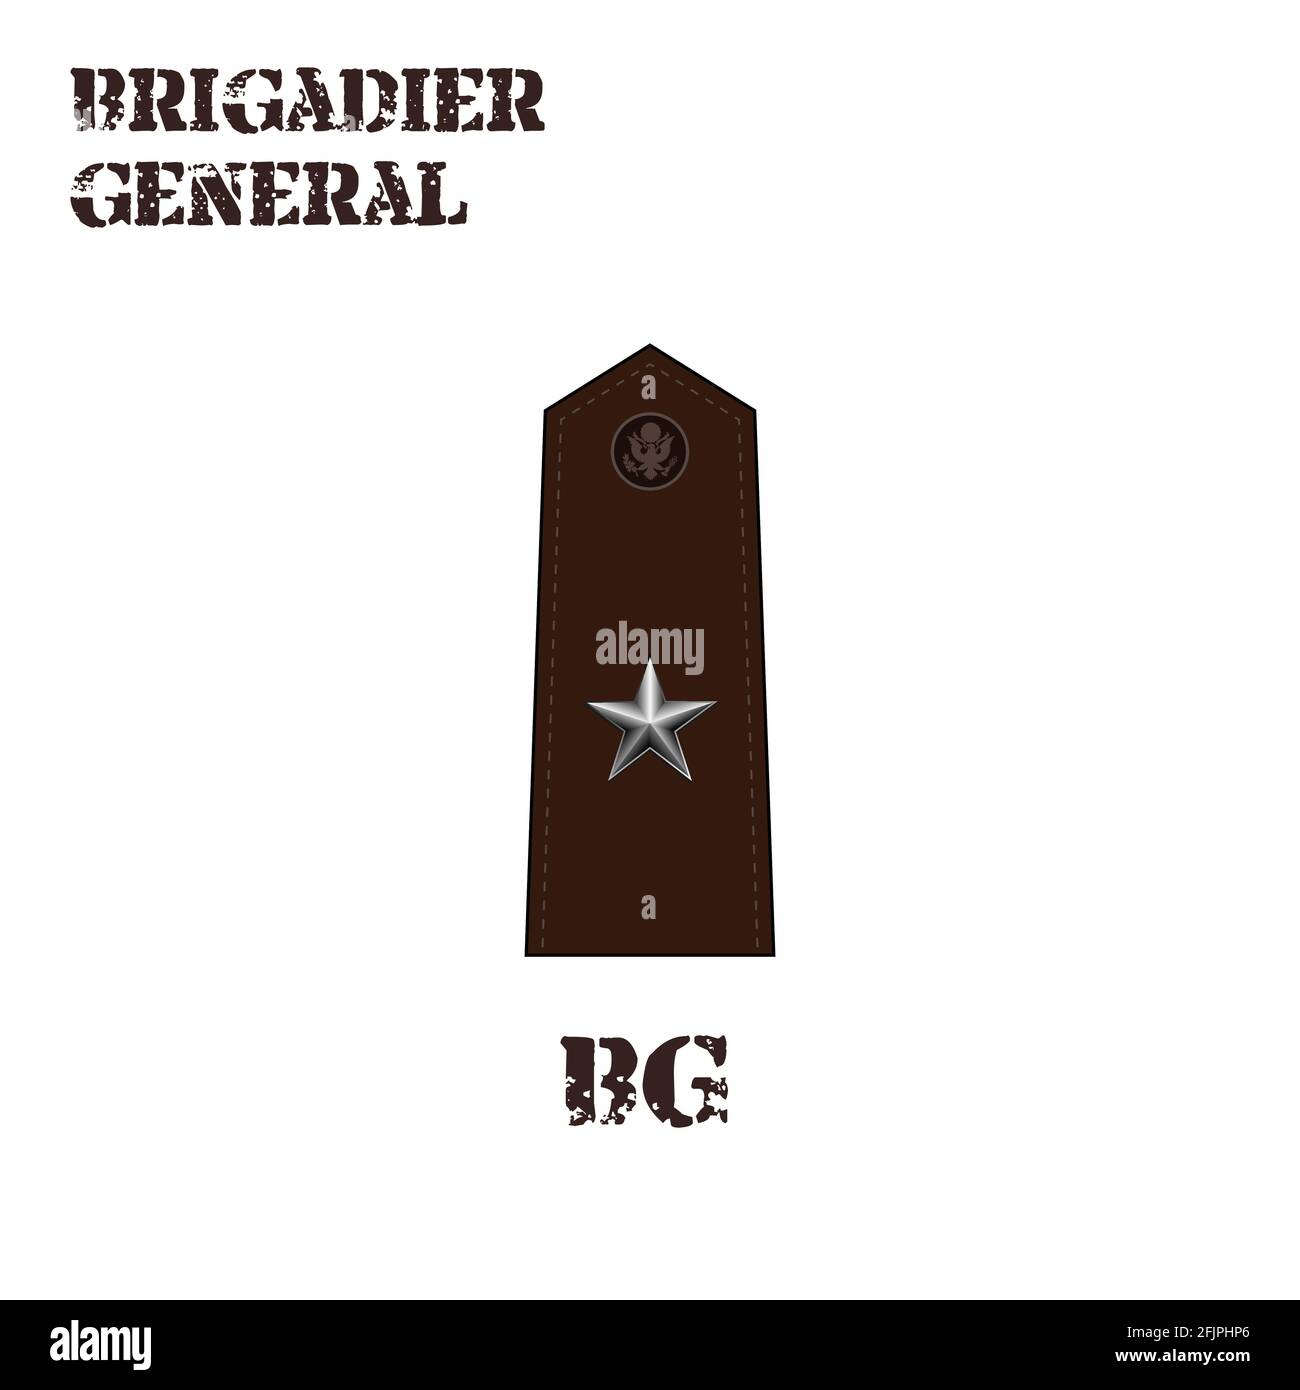 Realistic vector icon of the chevron of the Brigadier general of the US Army. Description and abbreviated name. Stock Vector